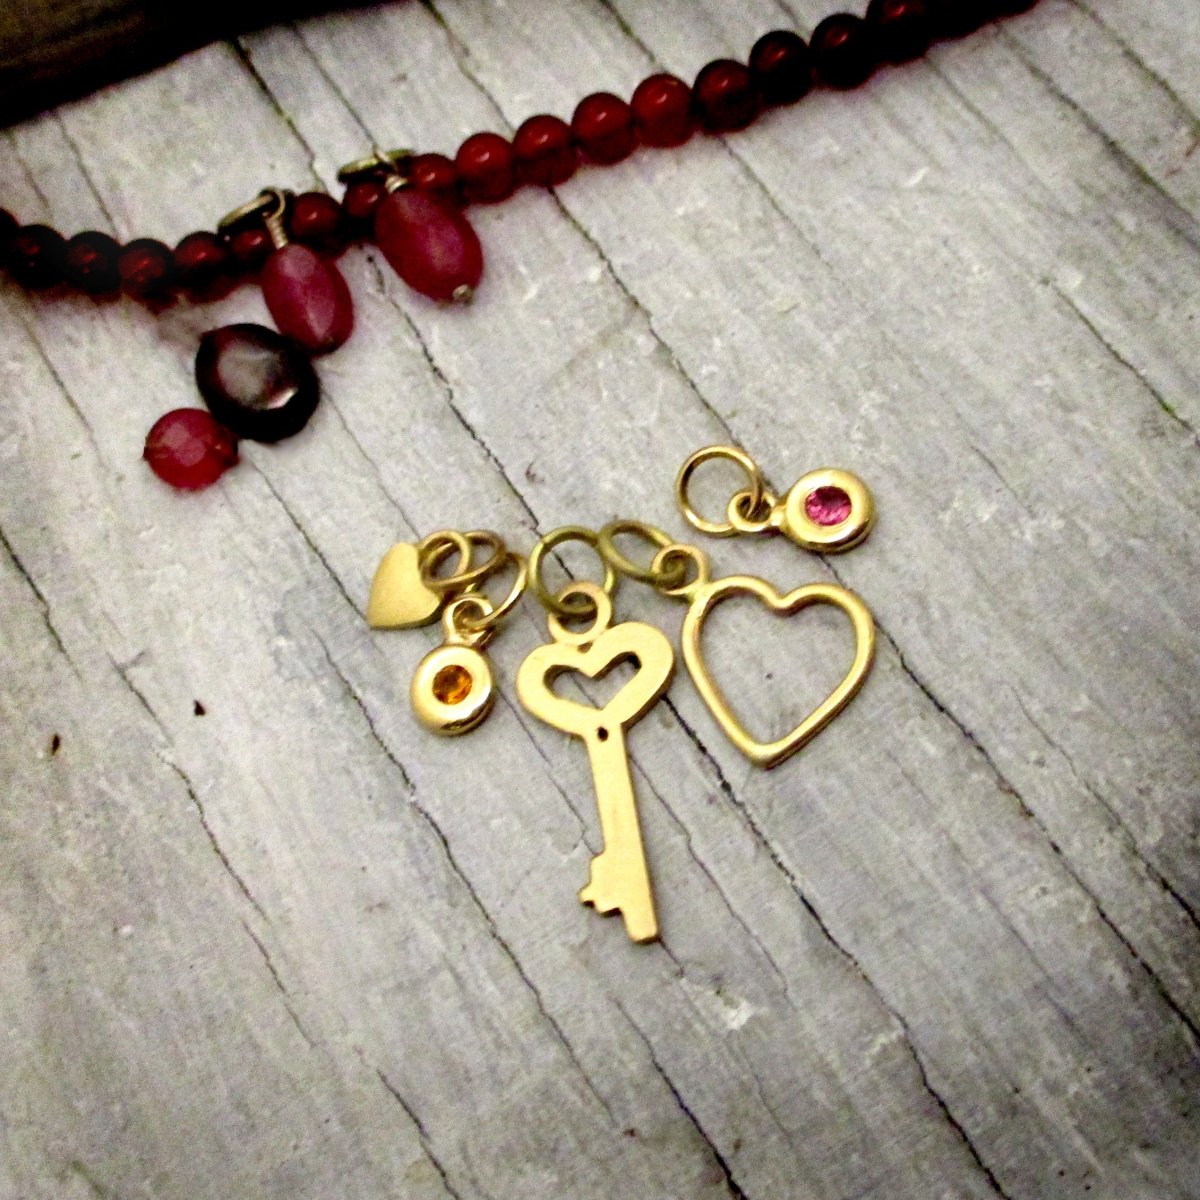 14k Gold Floating Heart Charm - Luxe Design Jewellery